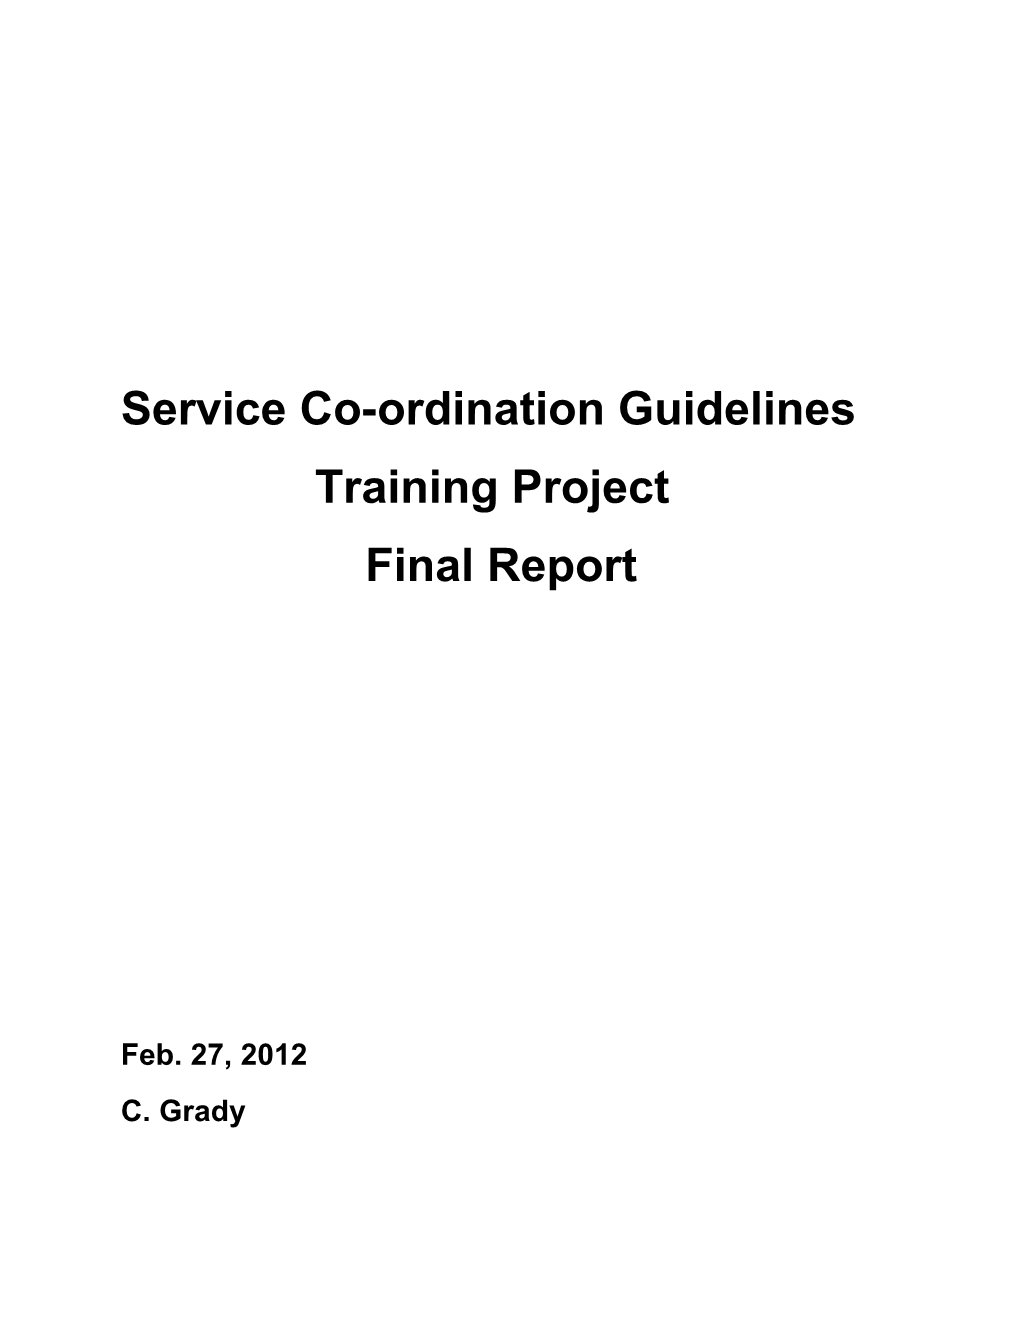 Service Co-Ordination Guidelines